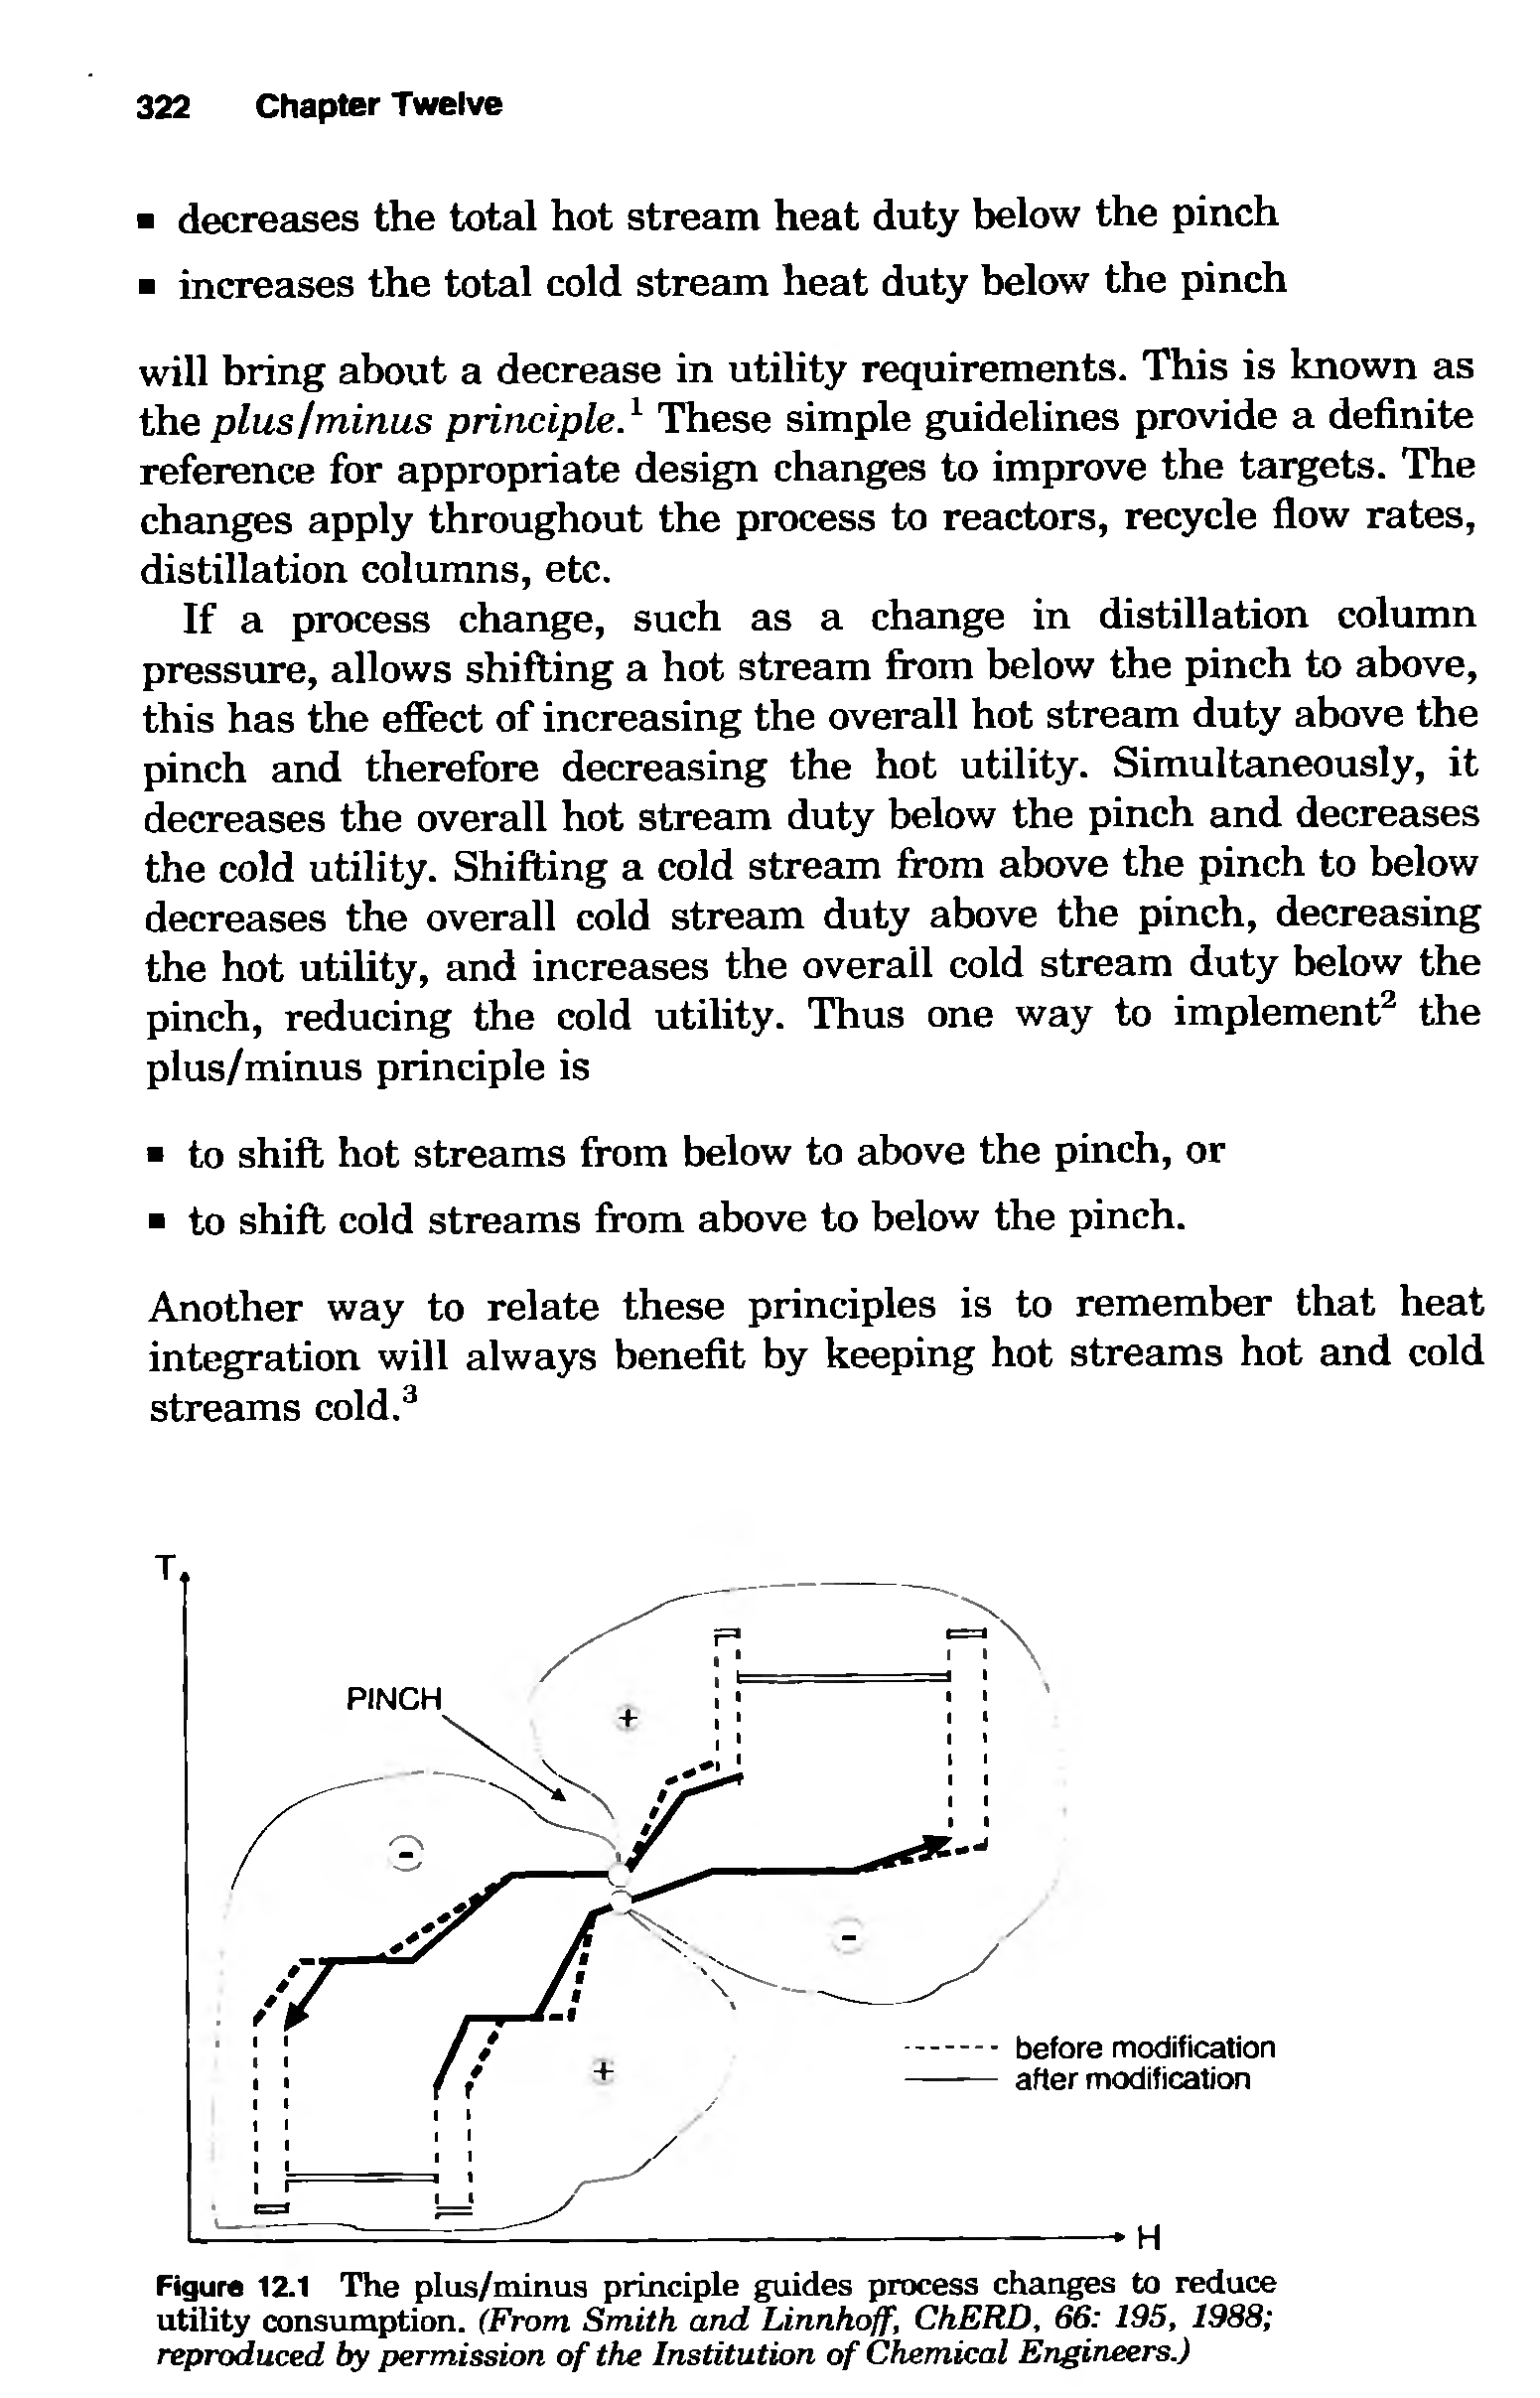 Figura 12.1 The plus/minua principle guides process changes to reduce utility consumption. (From Smith and Linnhoff, ChERD, 66 195, 1988 reproduced by permission of the Institution of Chemical Engineers.)...